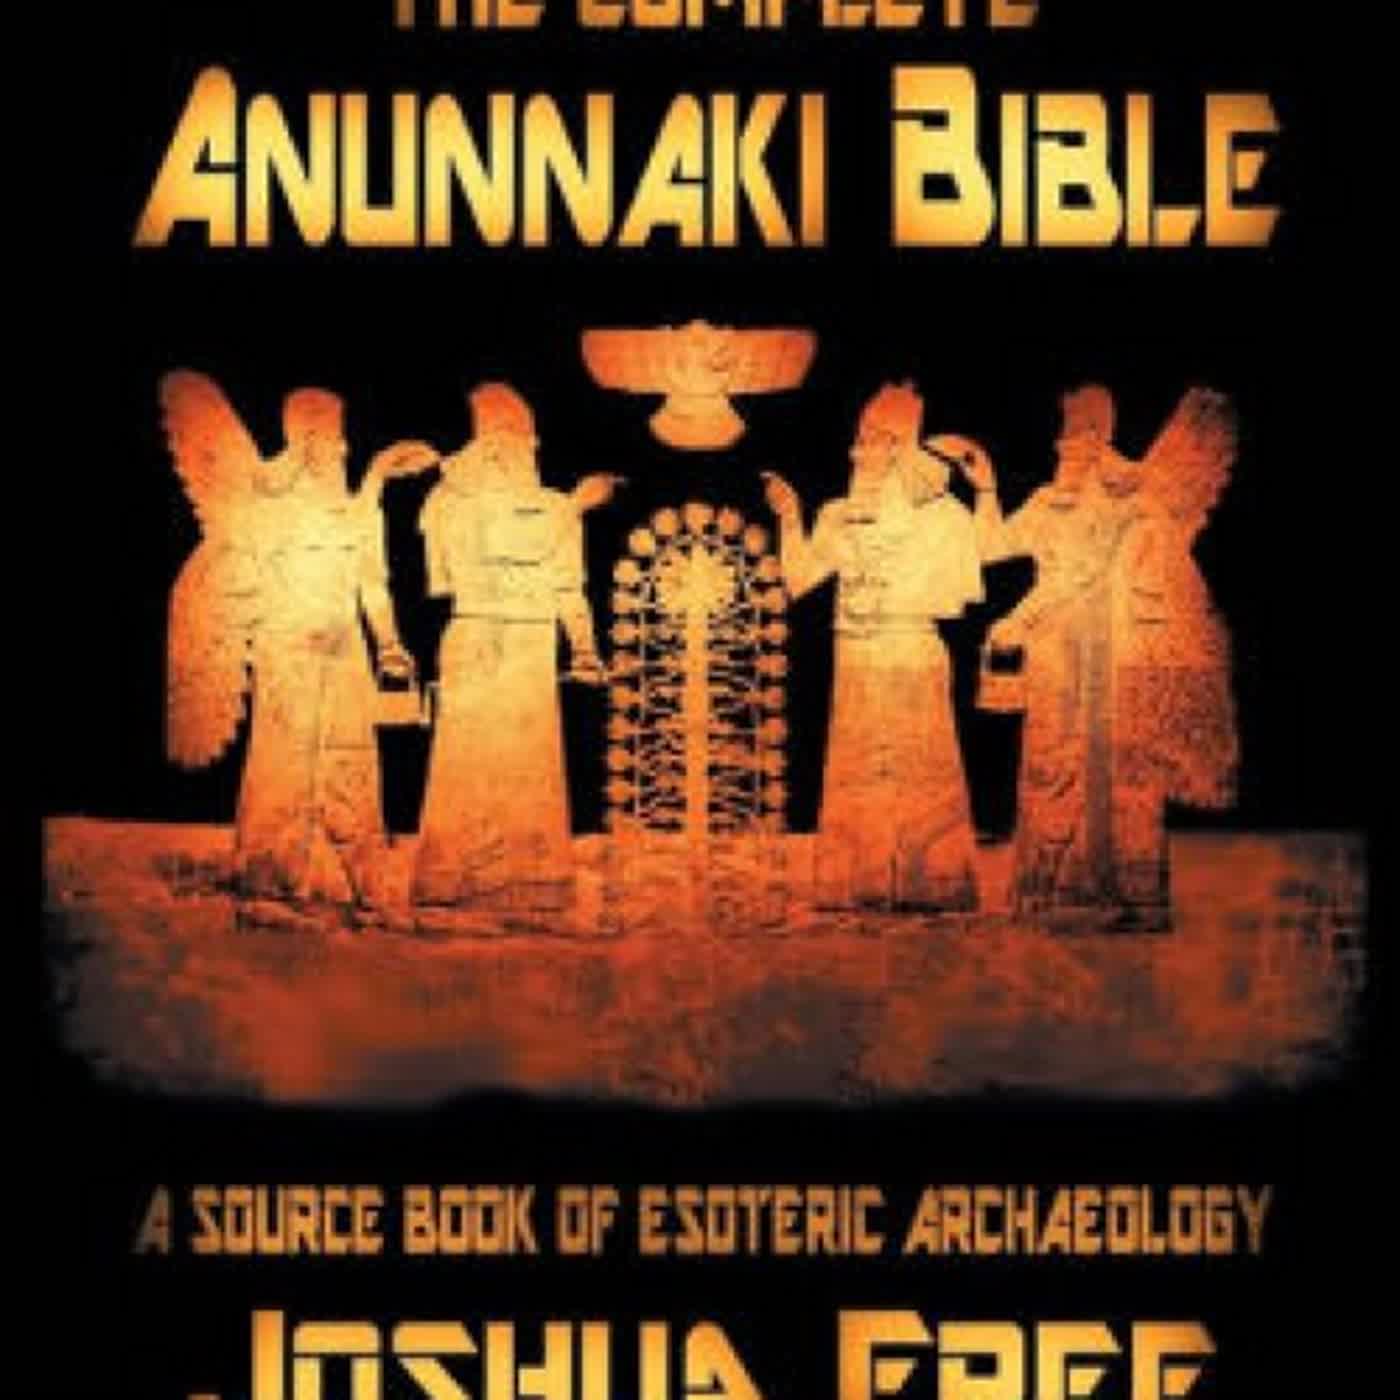 The Complete Anunnaki Bible: A Source Book of Esoteric Archaeology by Joshua Free on Iphone New Format